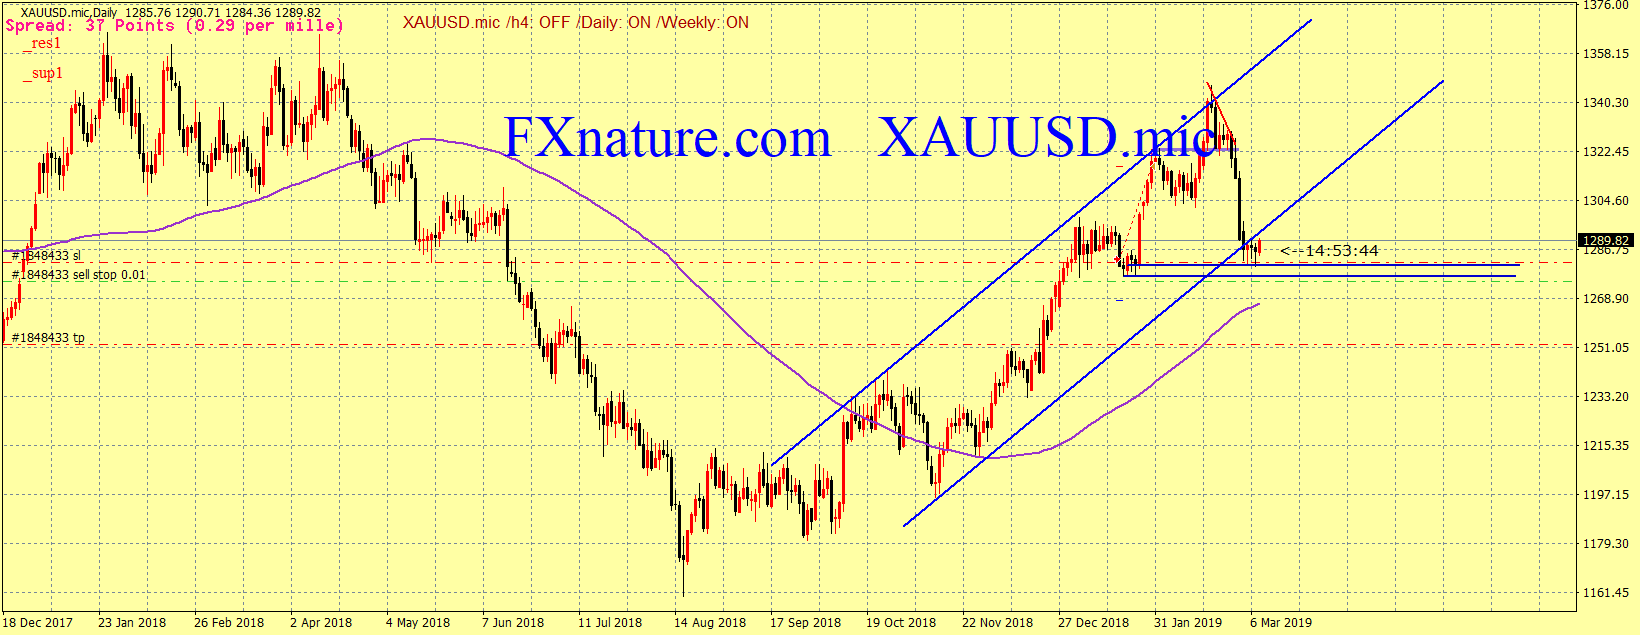 TECHNICAL ANALYSIS OF GOLD